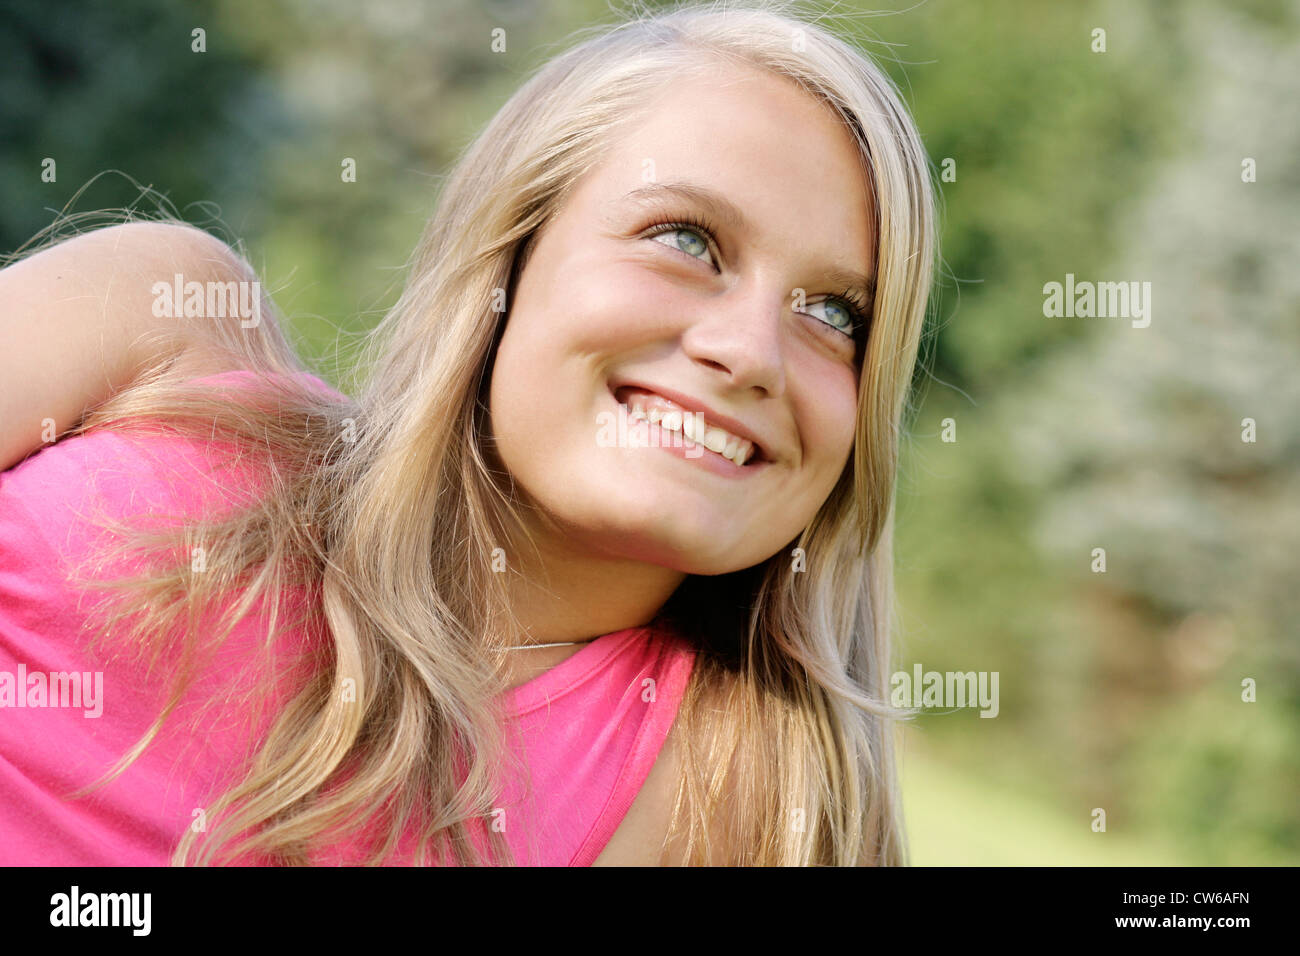 young blond smiling girl Stock Photo